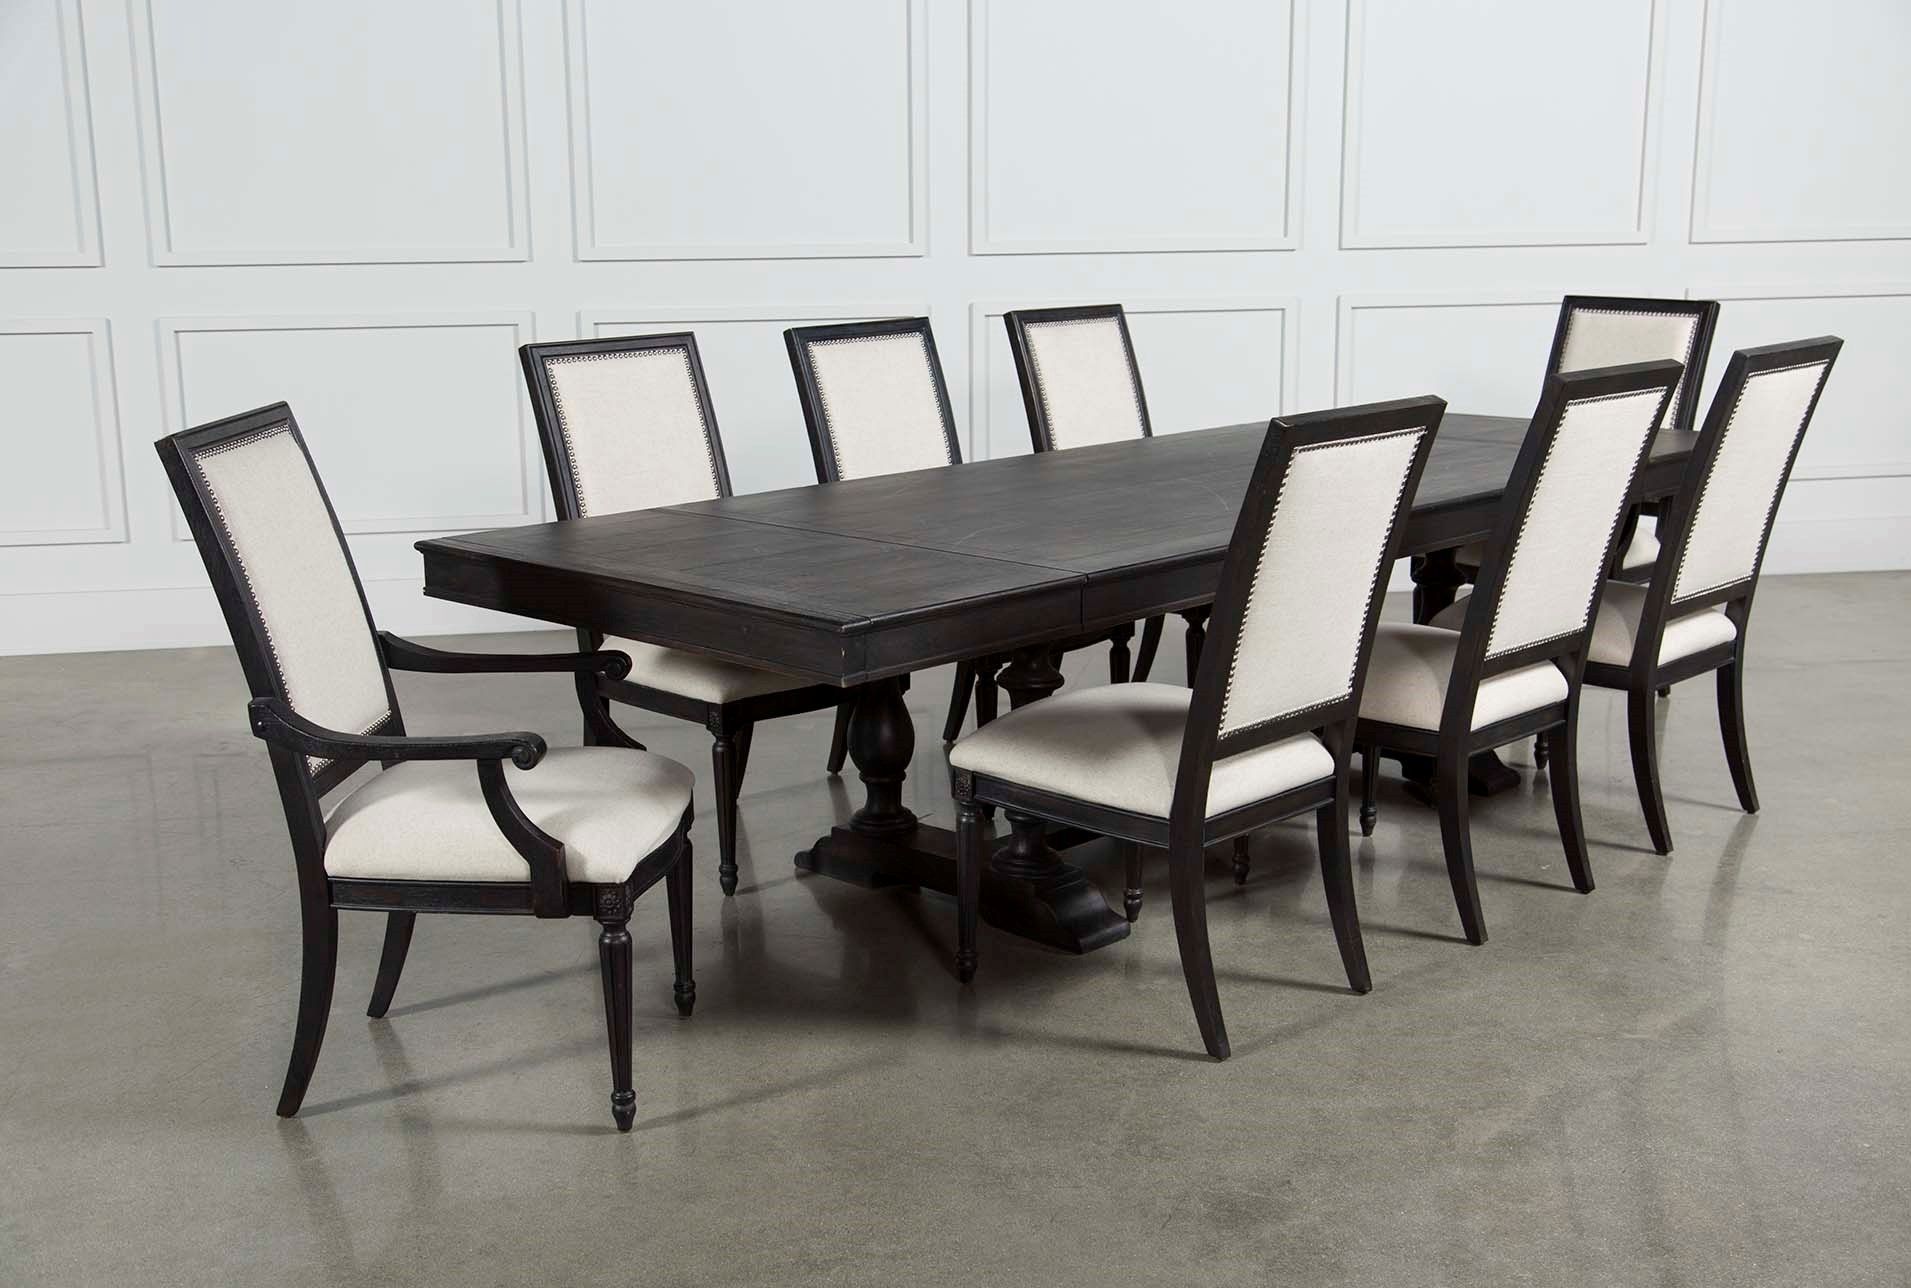 Chapleau 9 Piece Extension Dining Set, Brown | Extensions, Dining Intended For Recent Chapleau Ii 9 Piece Extension Dining Table Sets (View 1 of 20)